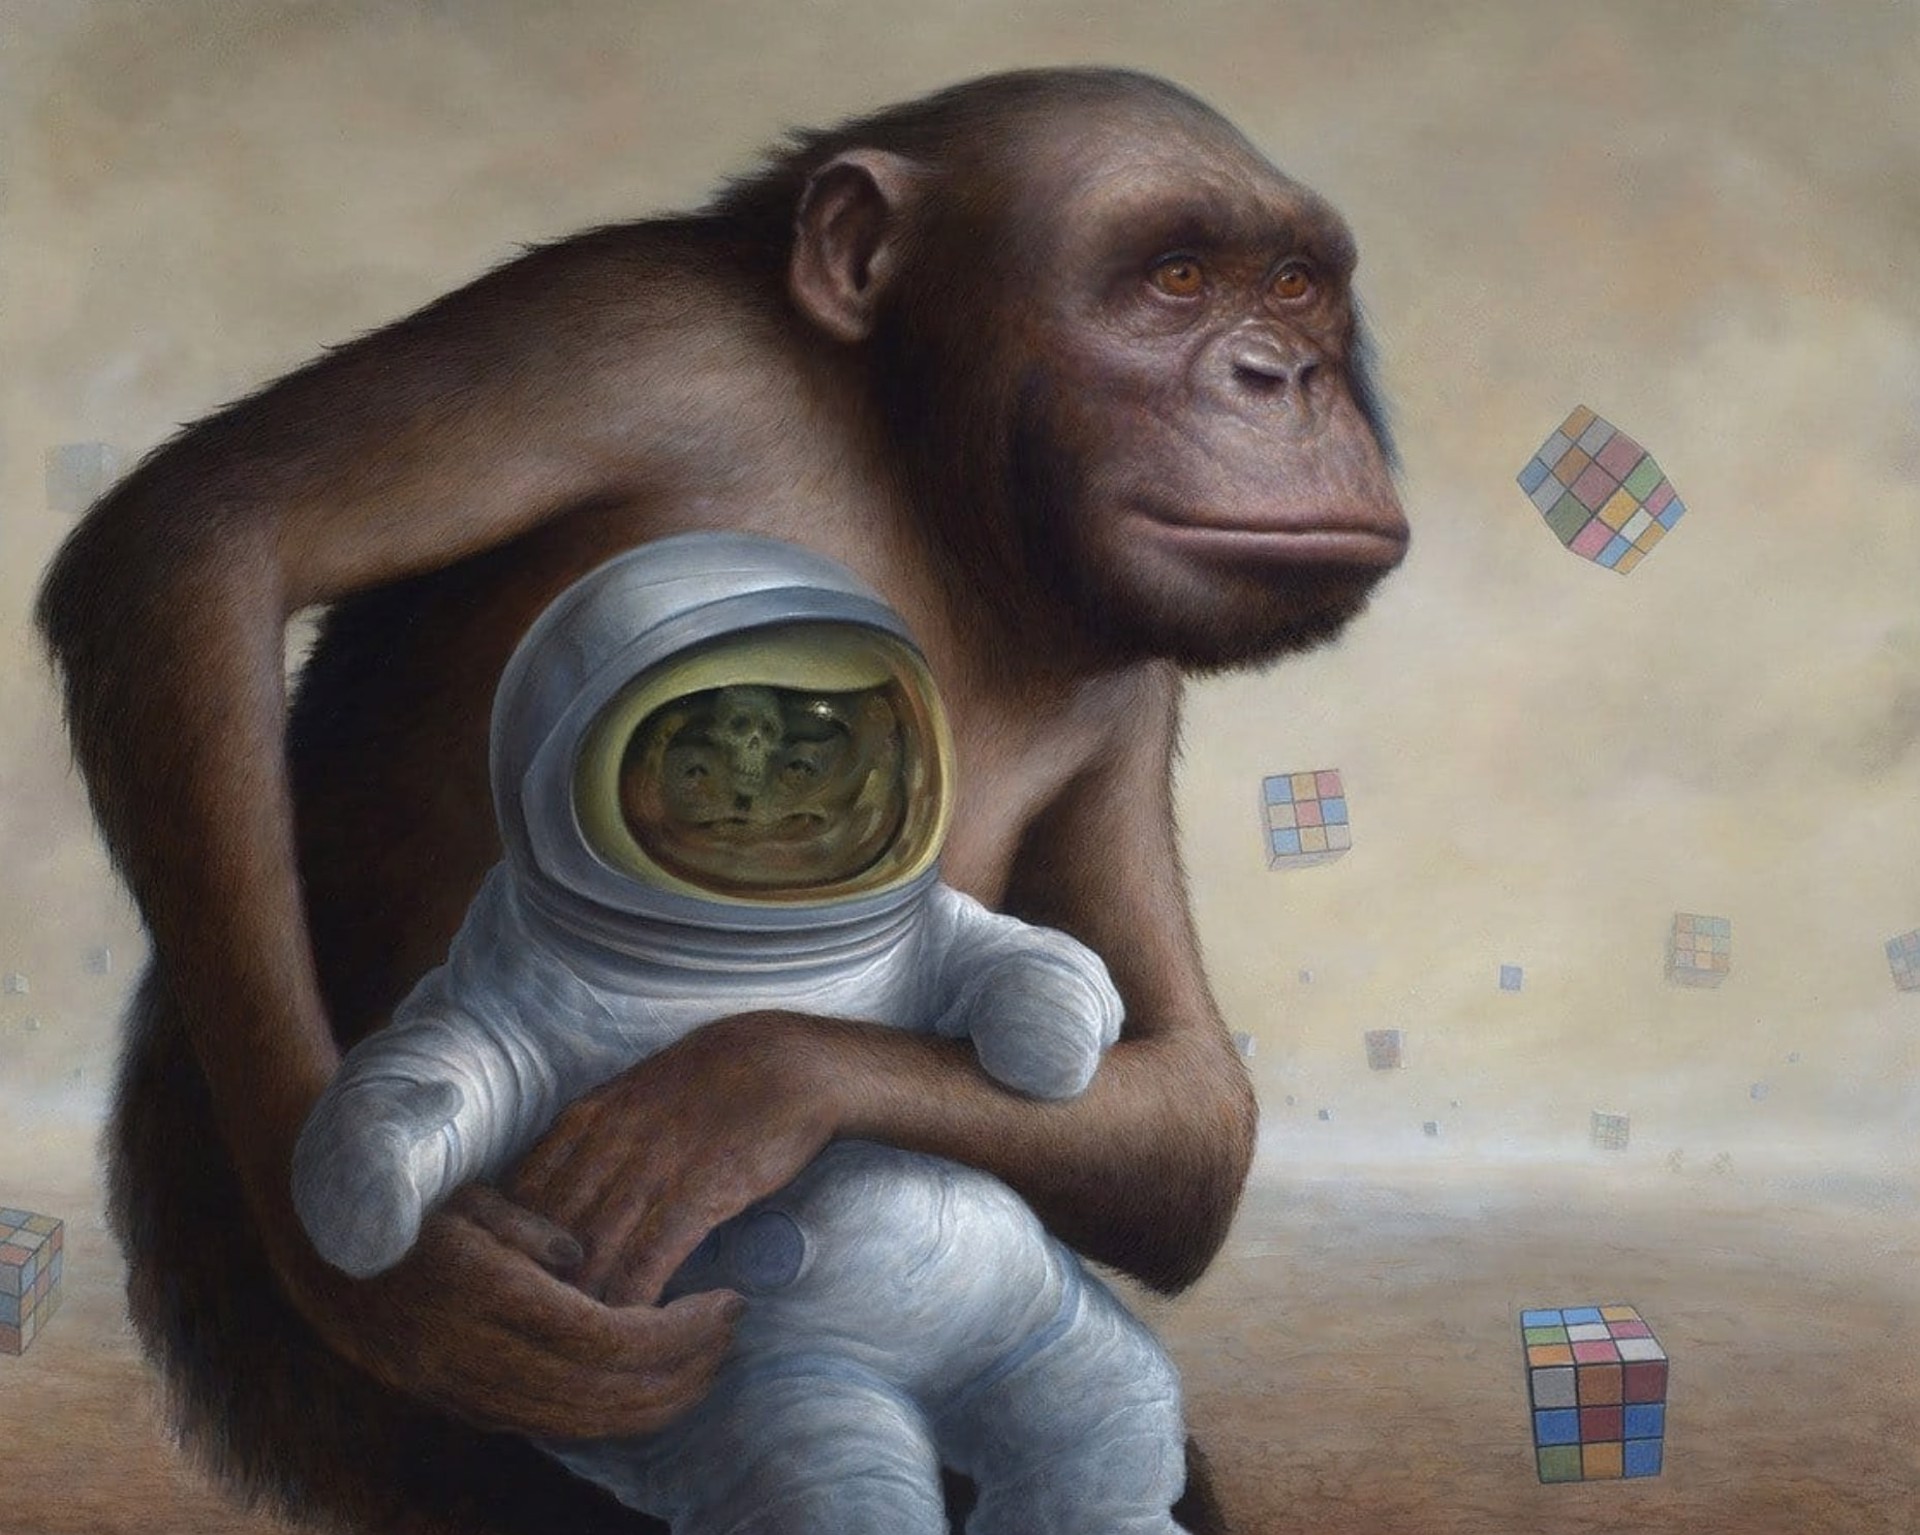 Mind Field by Chris Leib